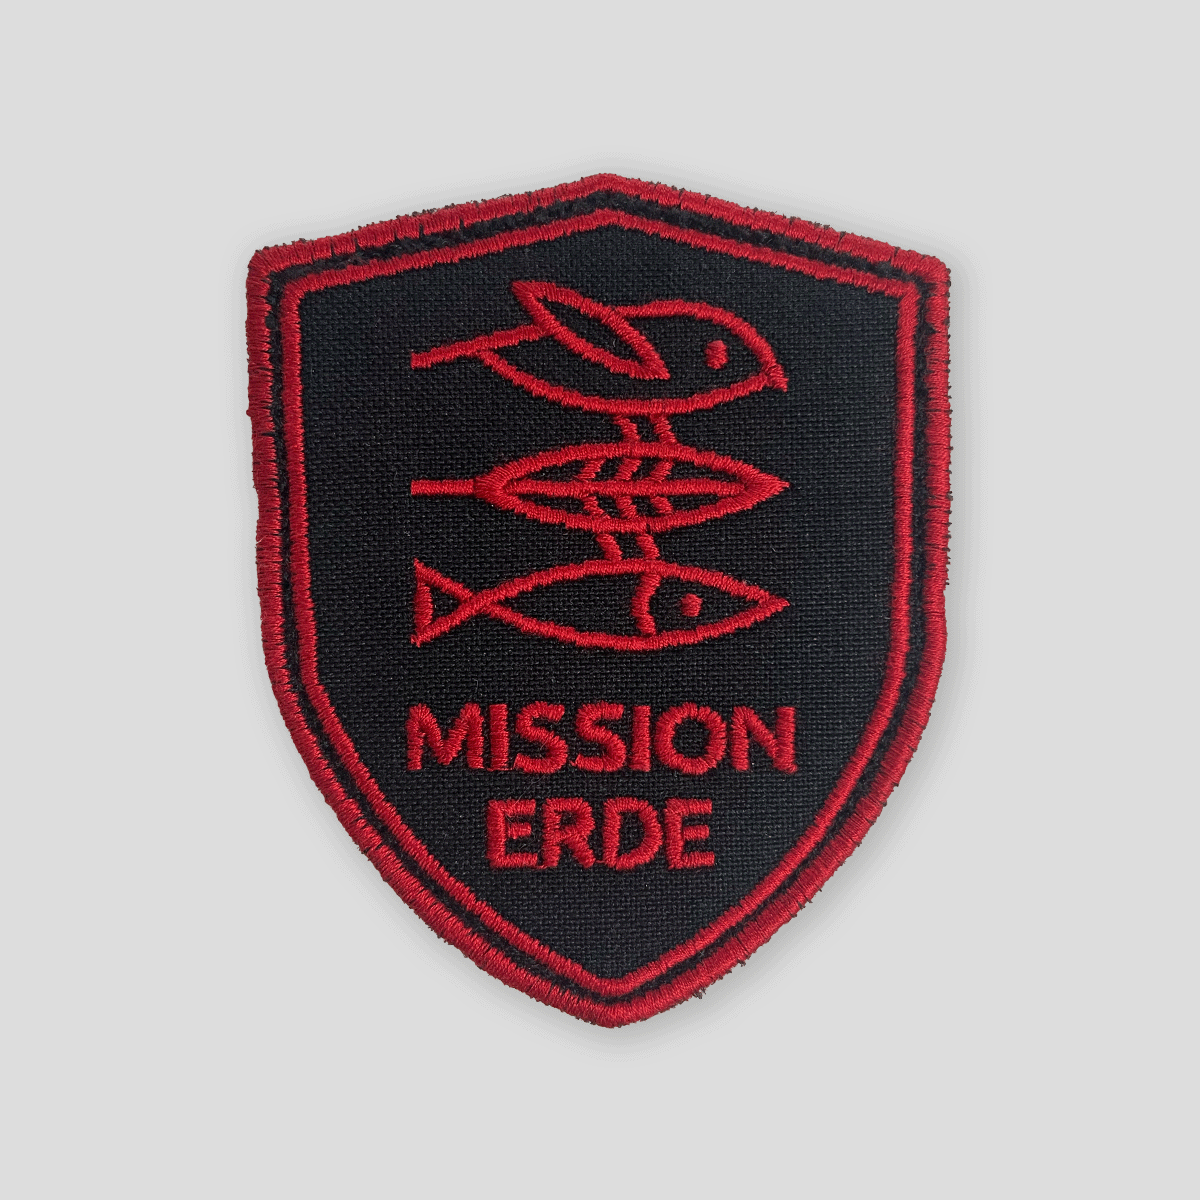 Patch "Mission Red"